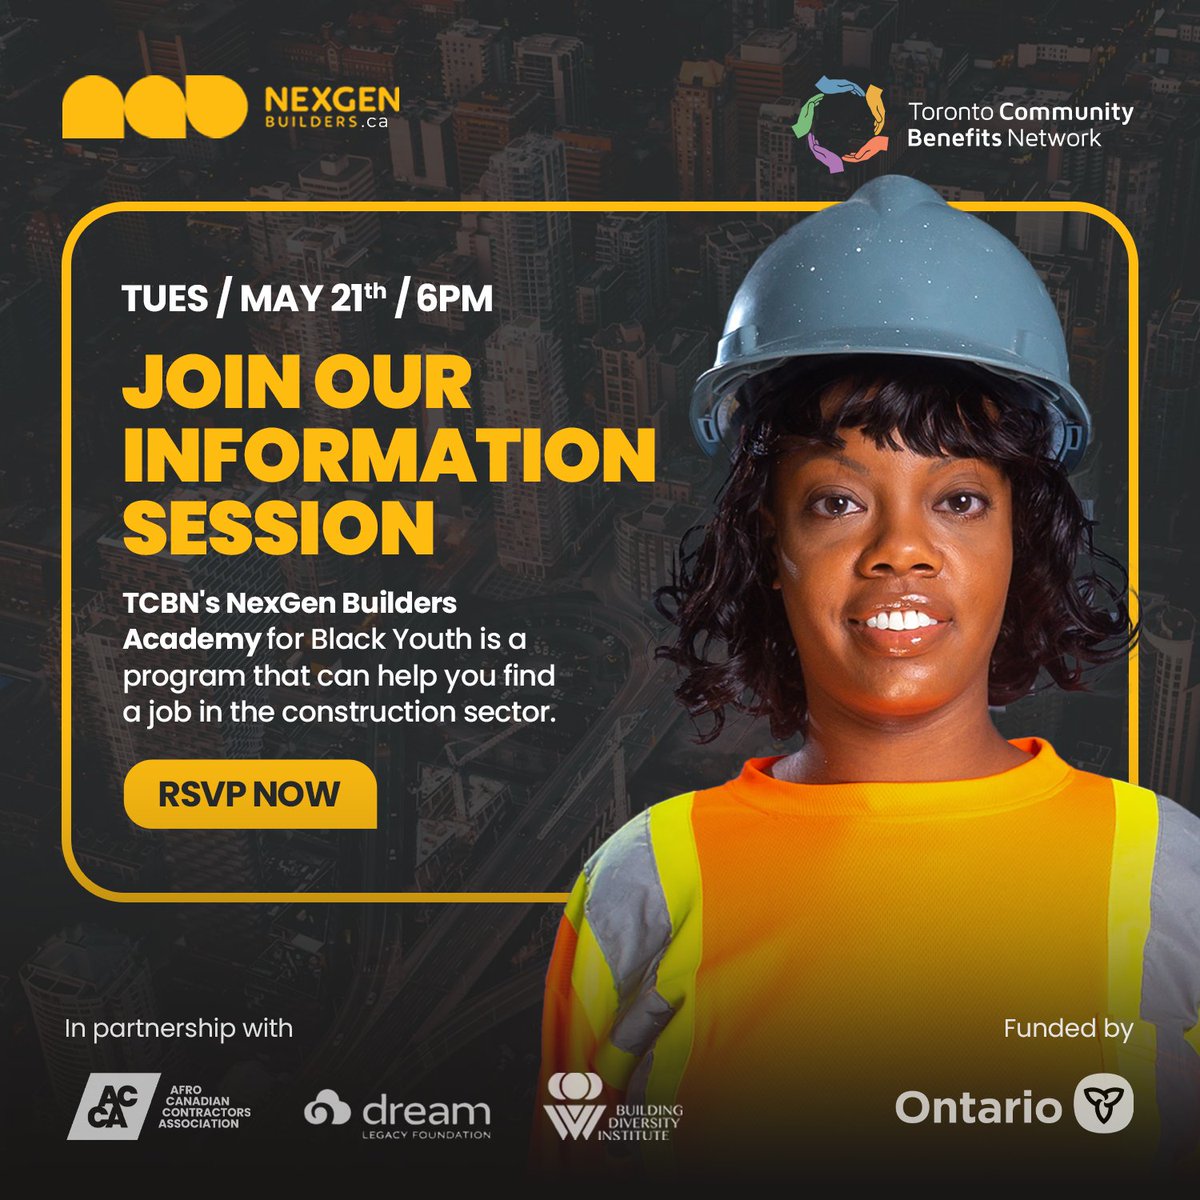 Join our info session to learn about TCBN’s Nexgen Builders Academy for Black Youth

When: May 21 at 6 pm. 

In partnership with Afro Canadian Contractors Association and @DreamLegacyfdn

To RSVP, please visit: nexgenbuilders.ca/academy_info_s…

#communitybenefits #constructionindustry